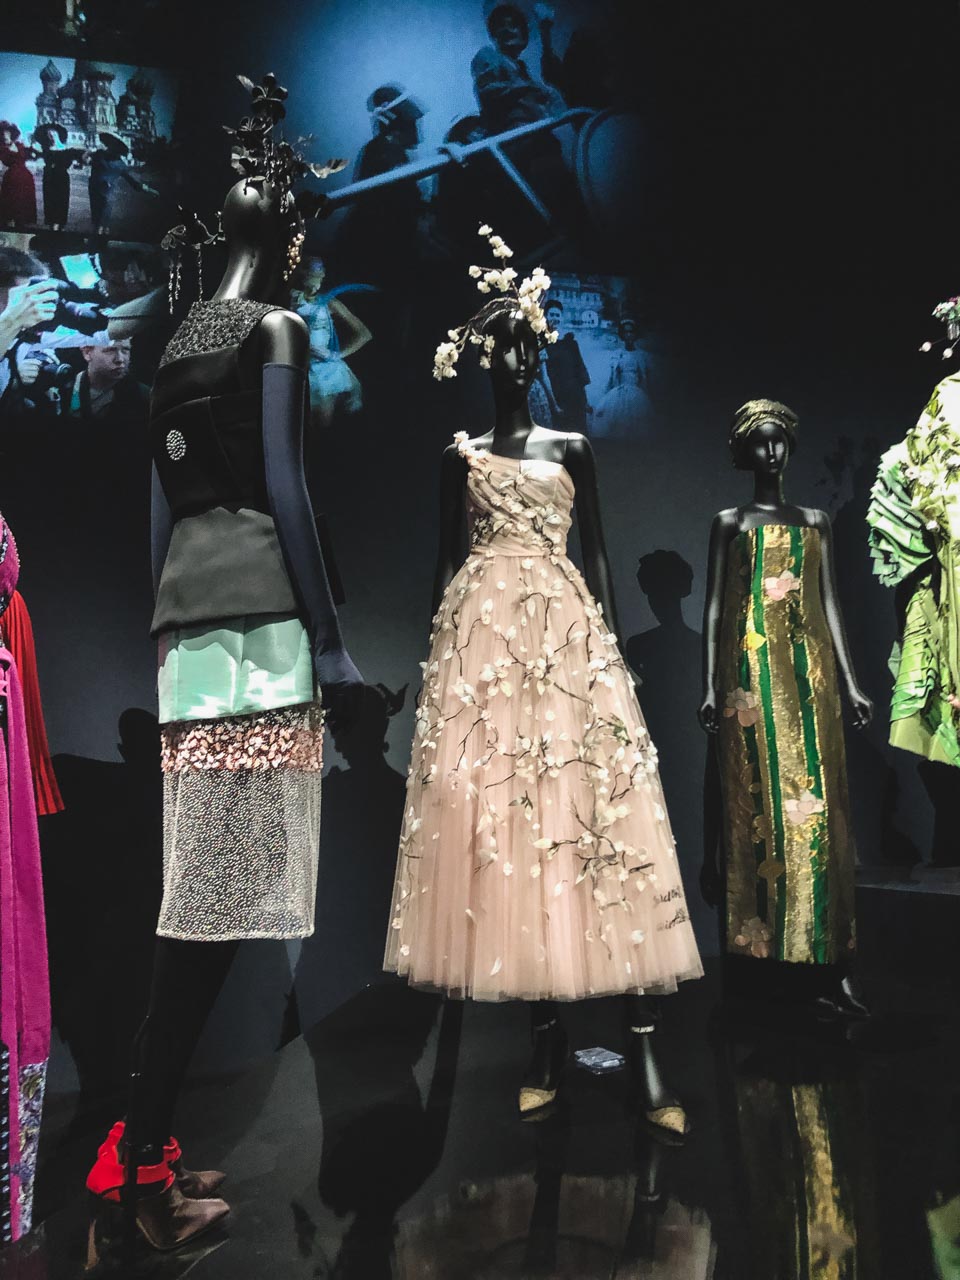 A blush tulle Dior gown with trailing cherry blossoms next to other Dior dresses on display